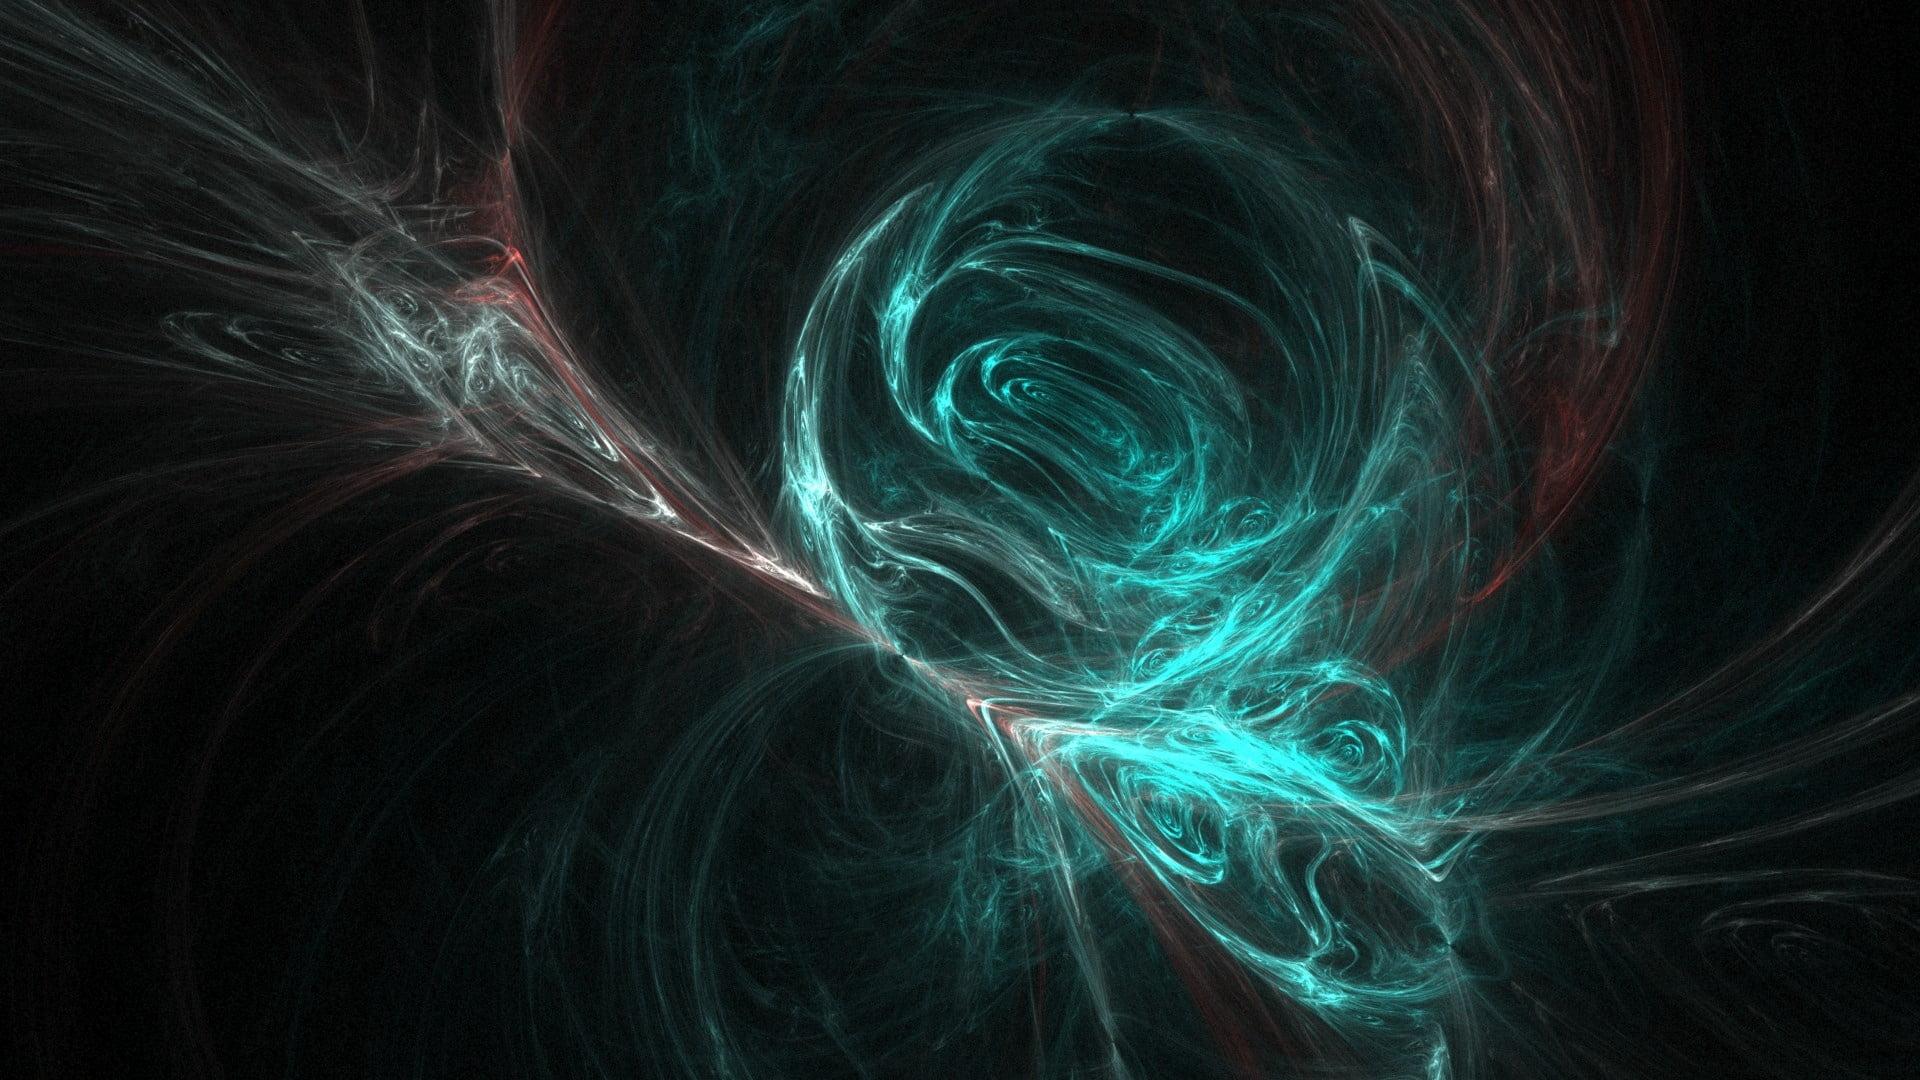 String Theory Wallpapers - Top Free String Theory Backgrounds ...